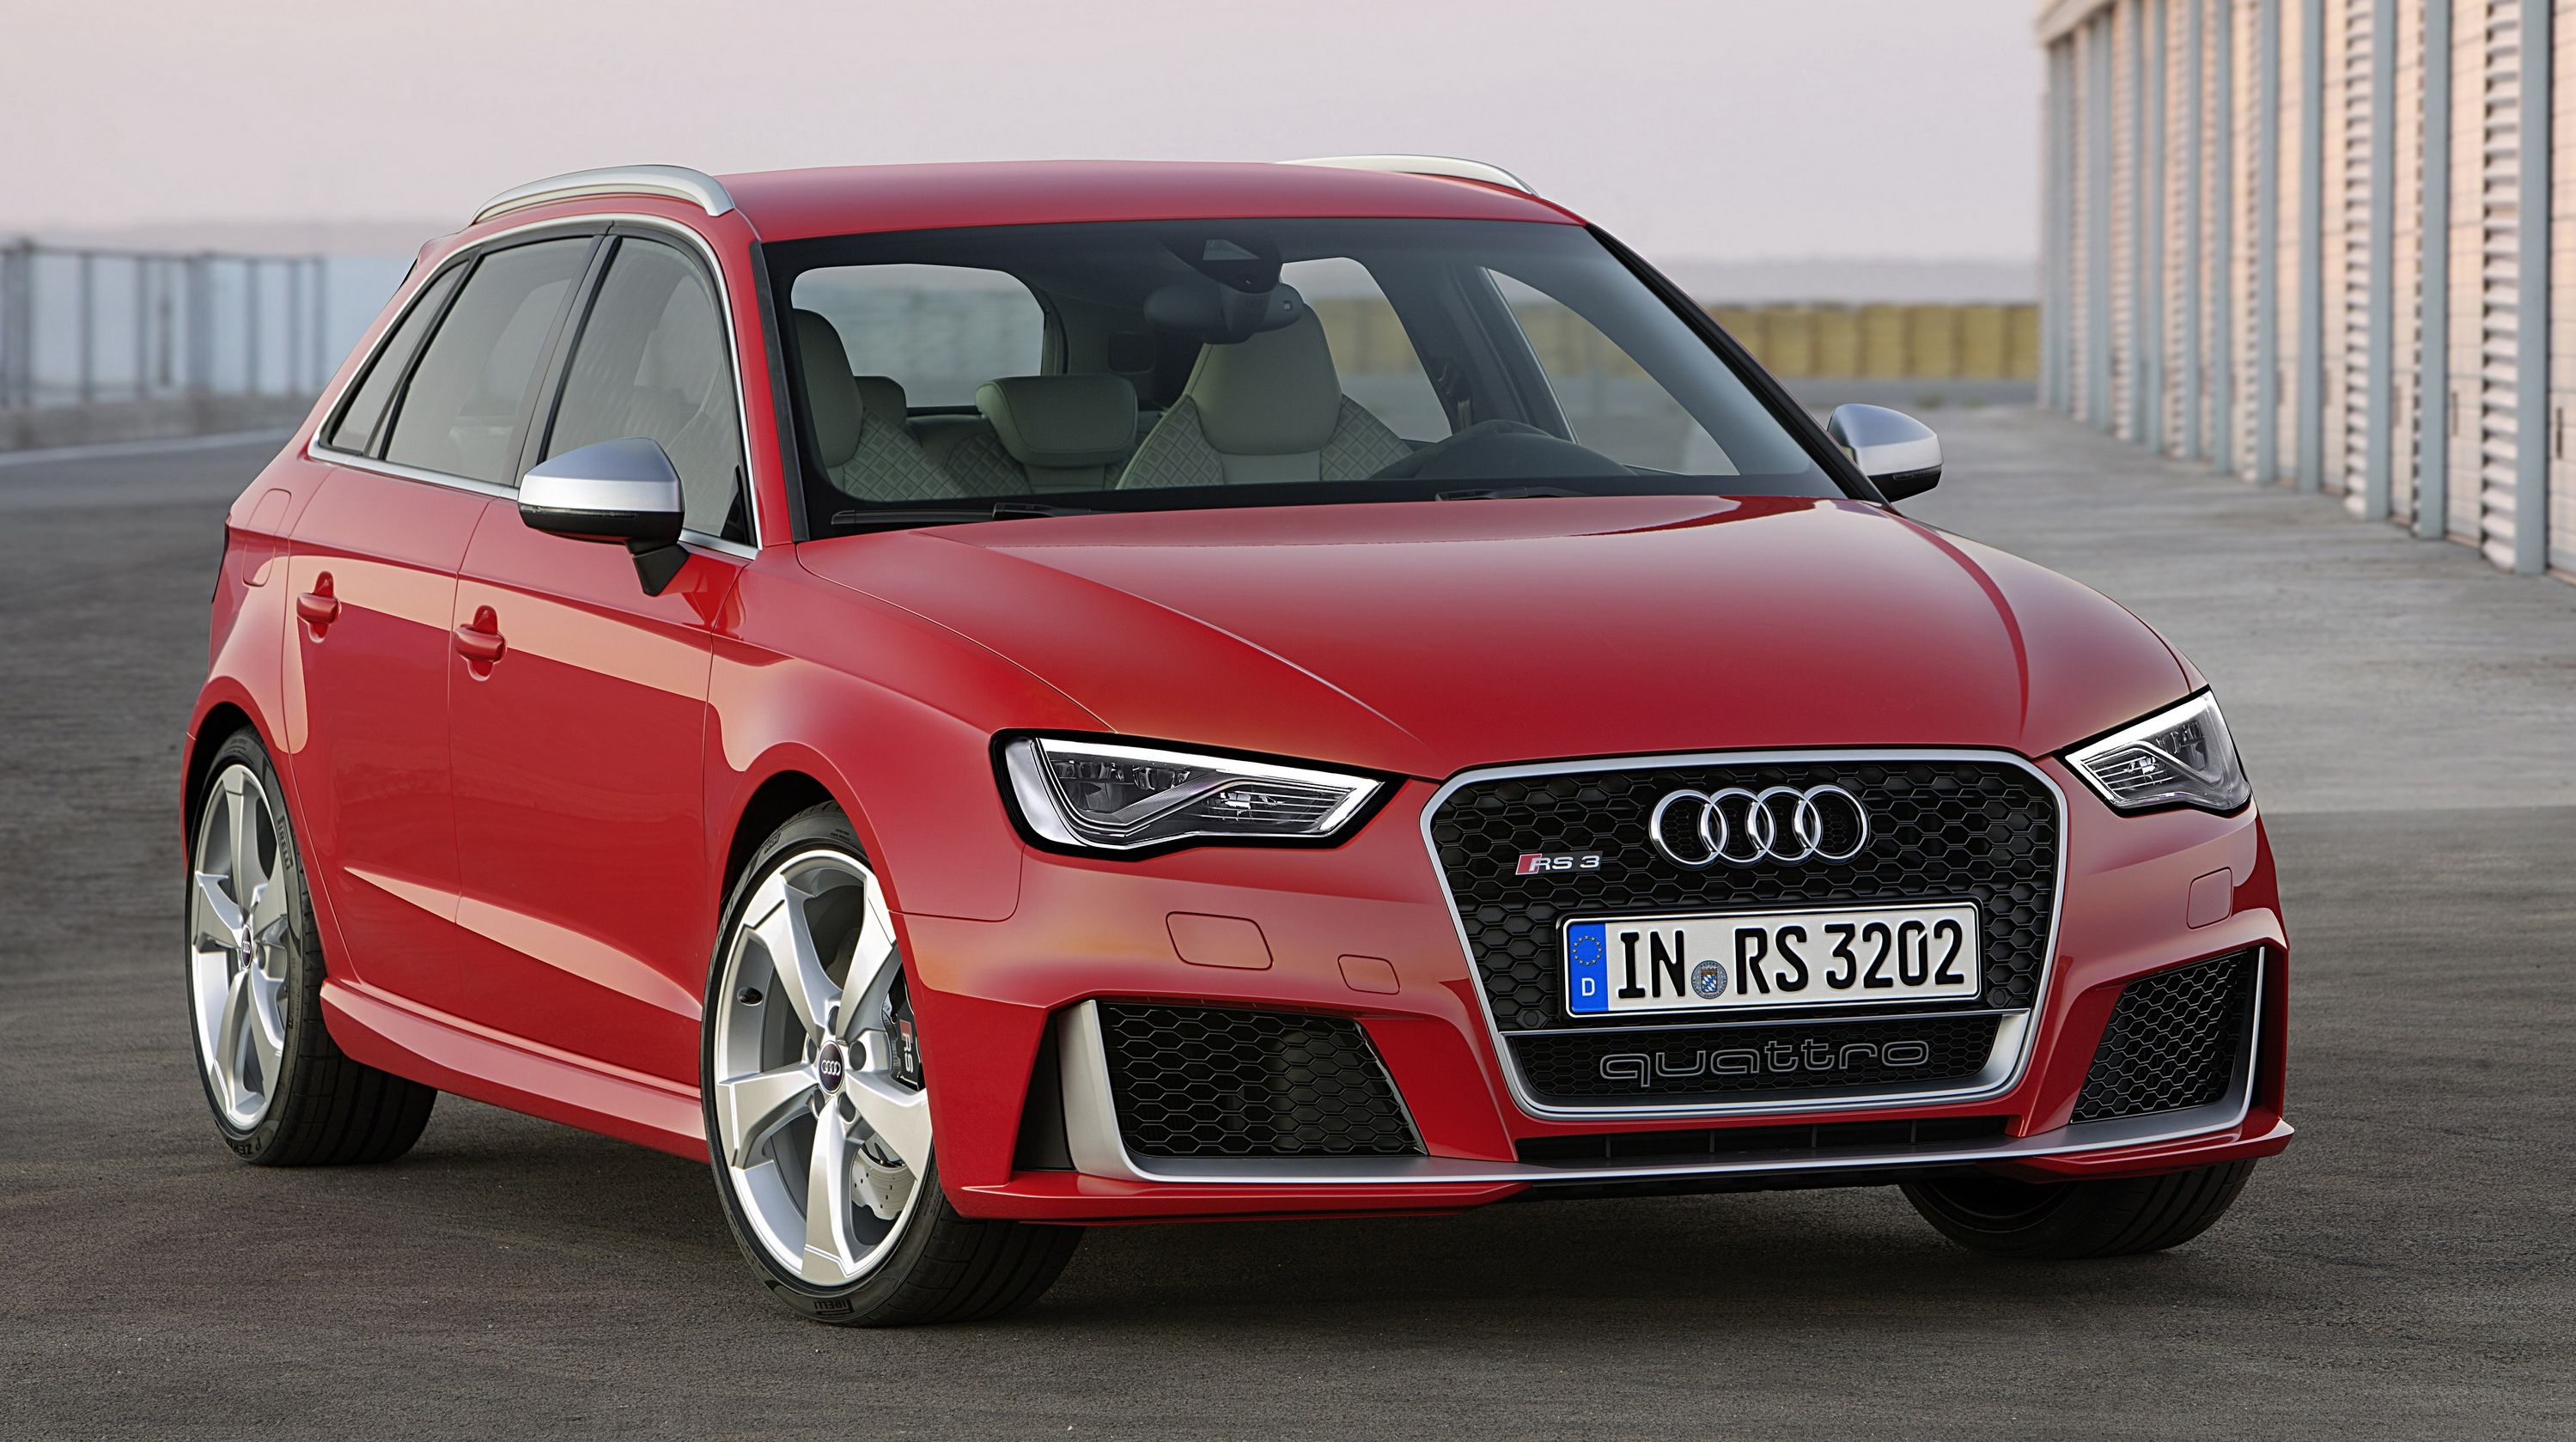  We finally received all of the information on the 2015 Audi RS3, and boy was it worth the wait!